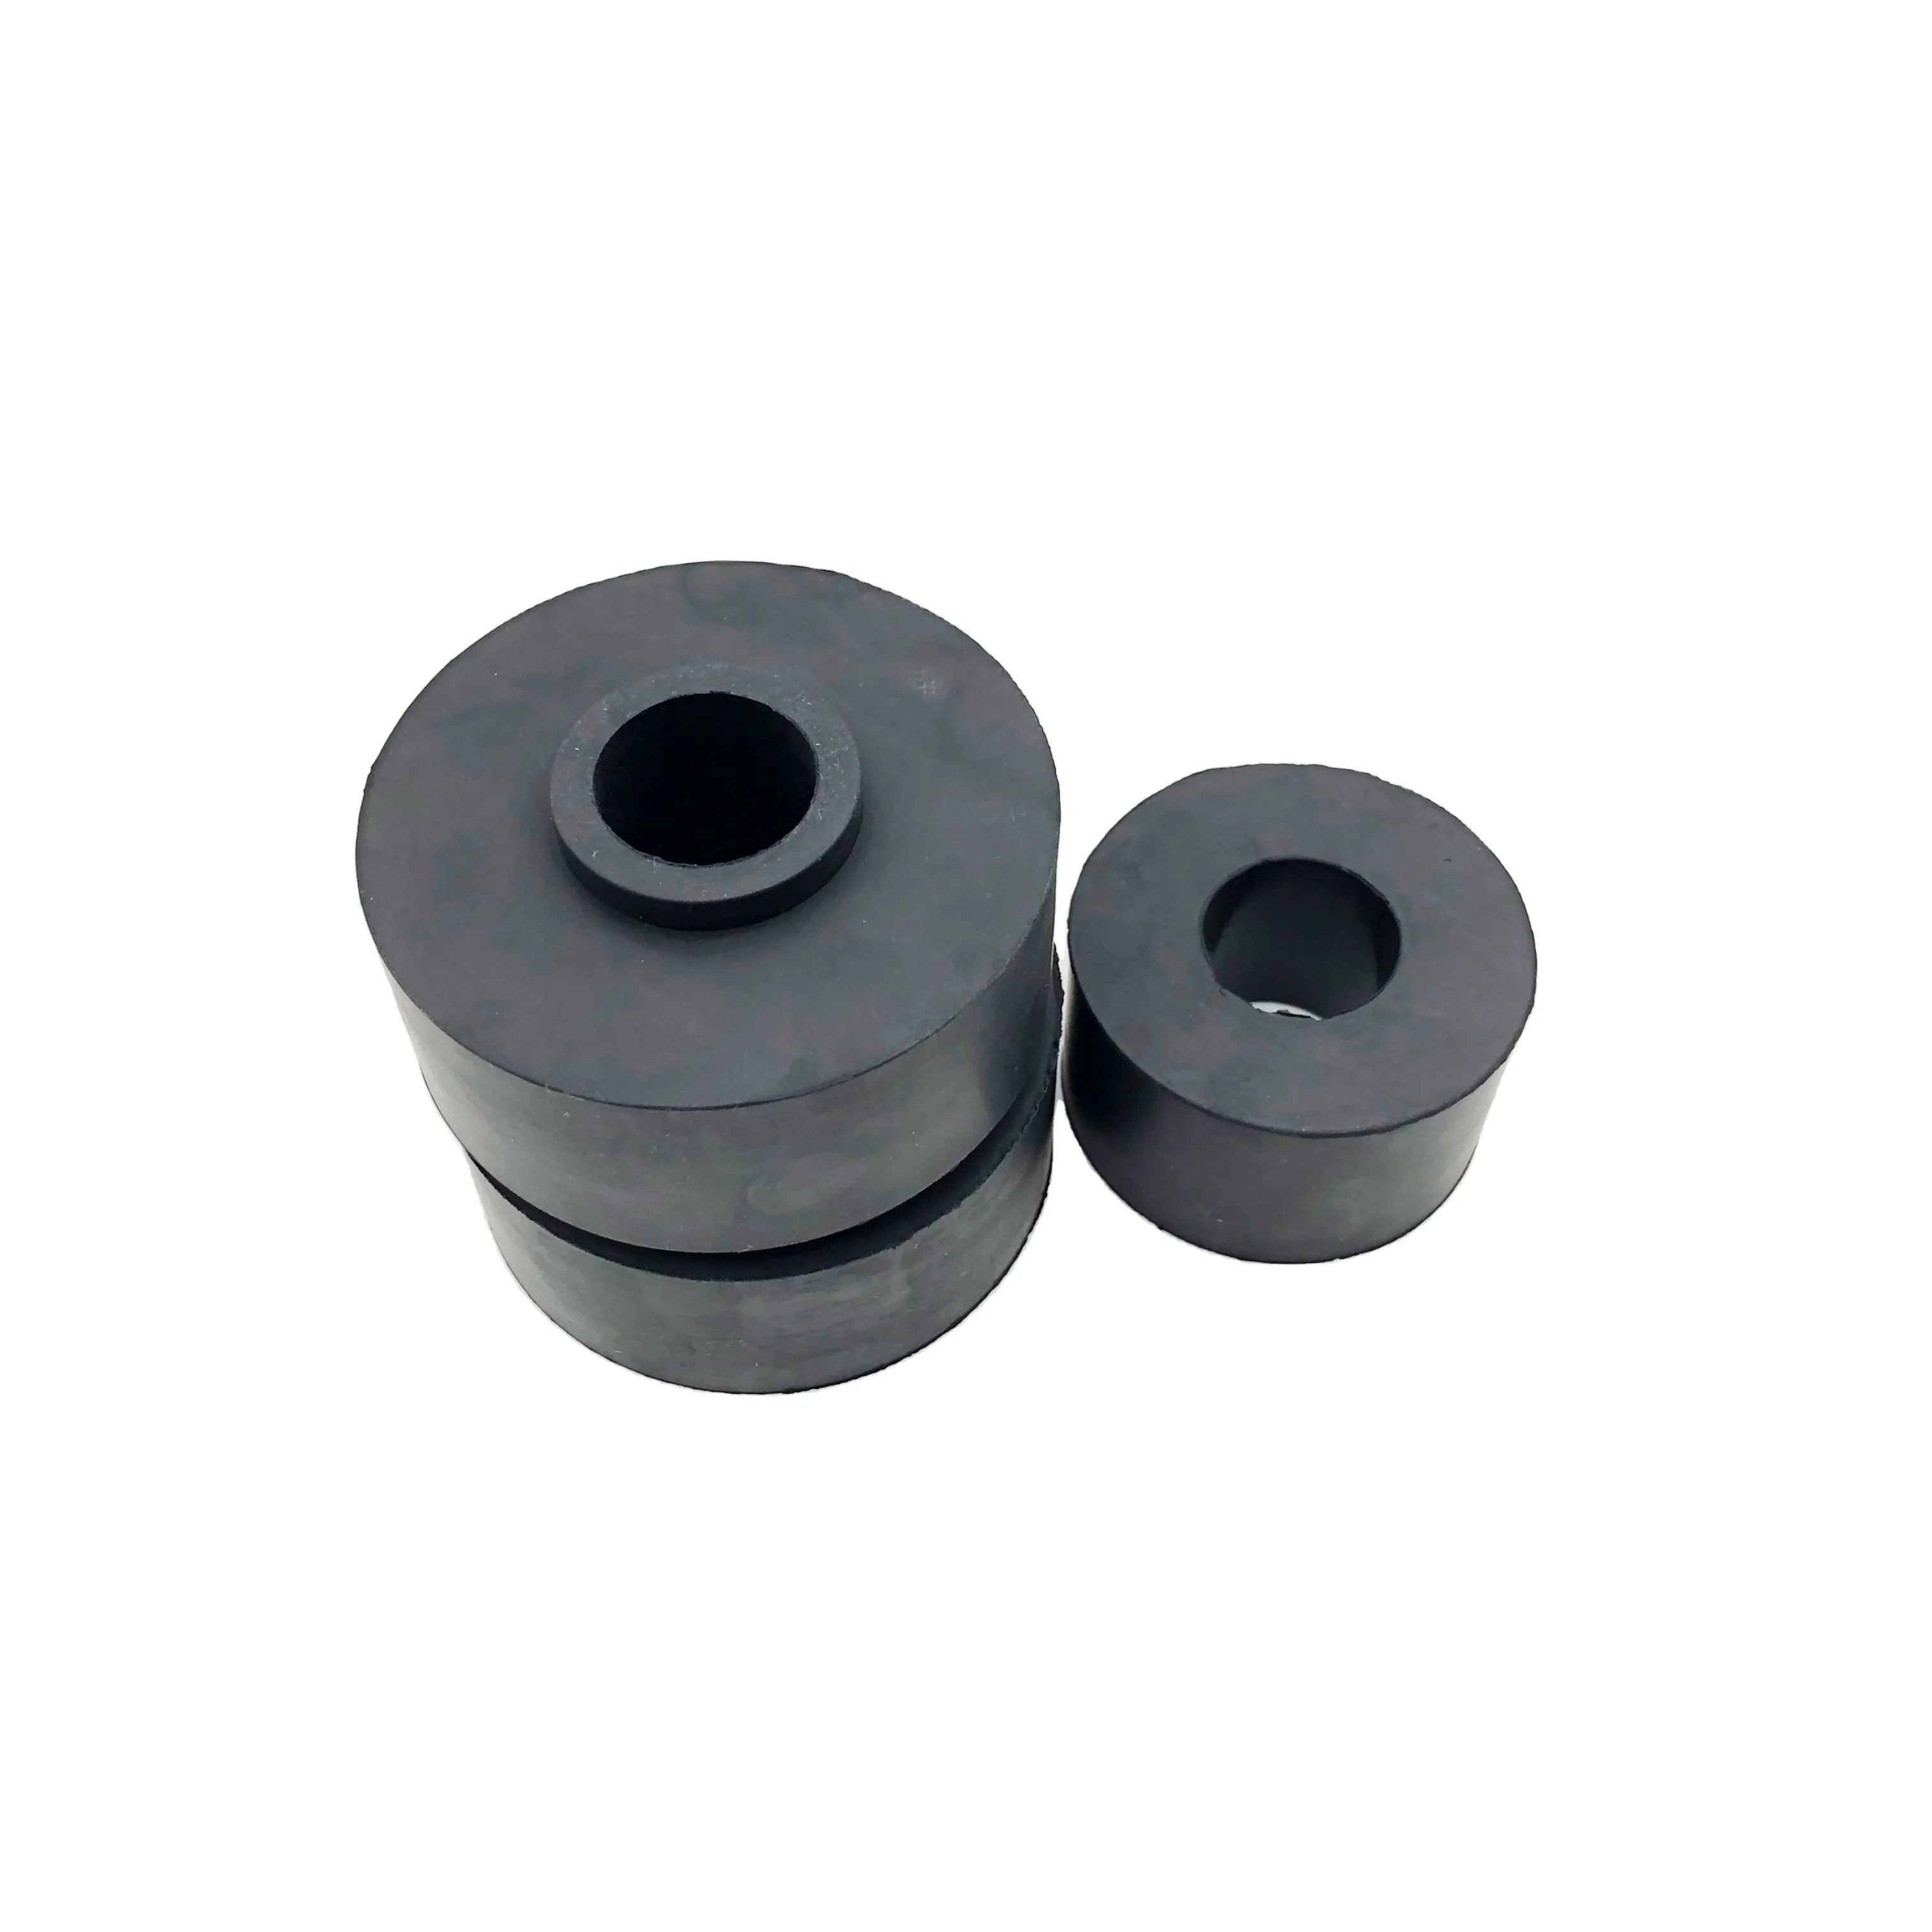 
Recycled EPDM high performance body mount for a vehicle rubber part 